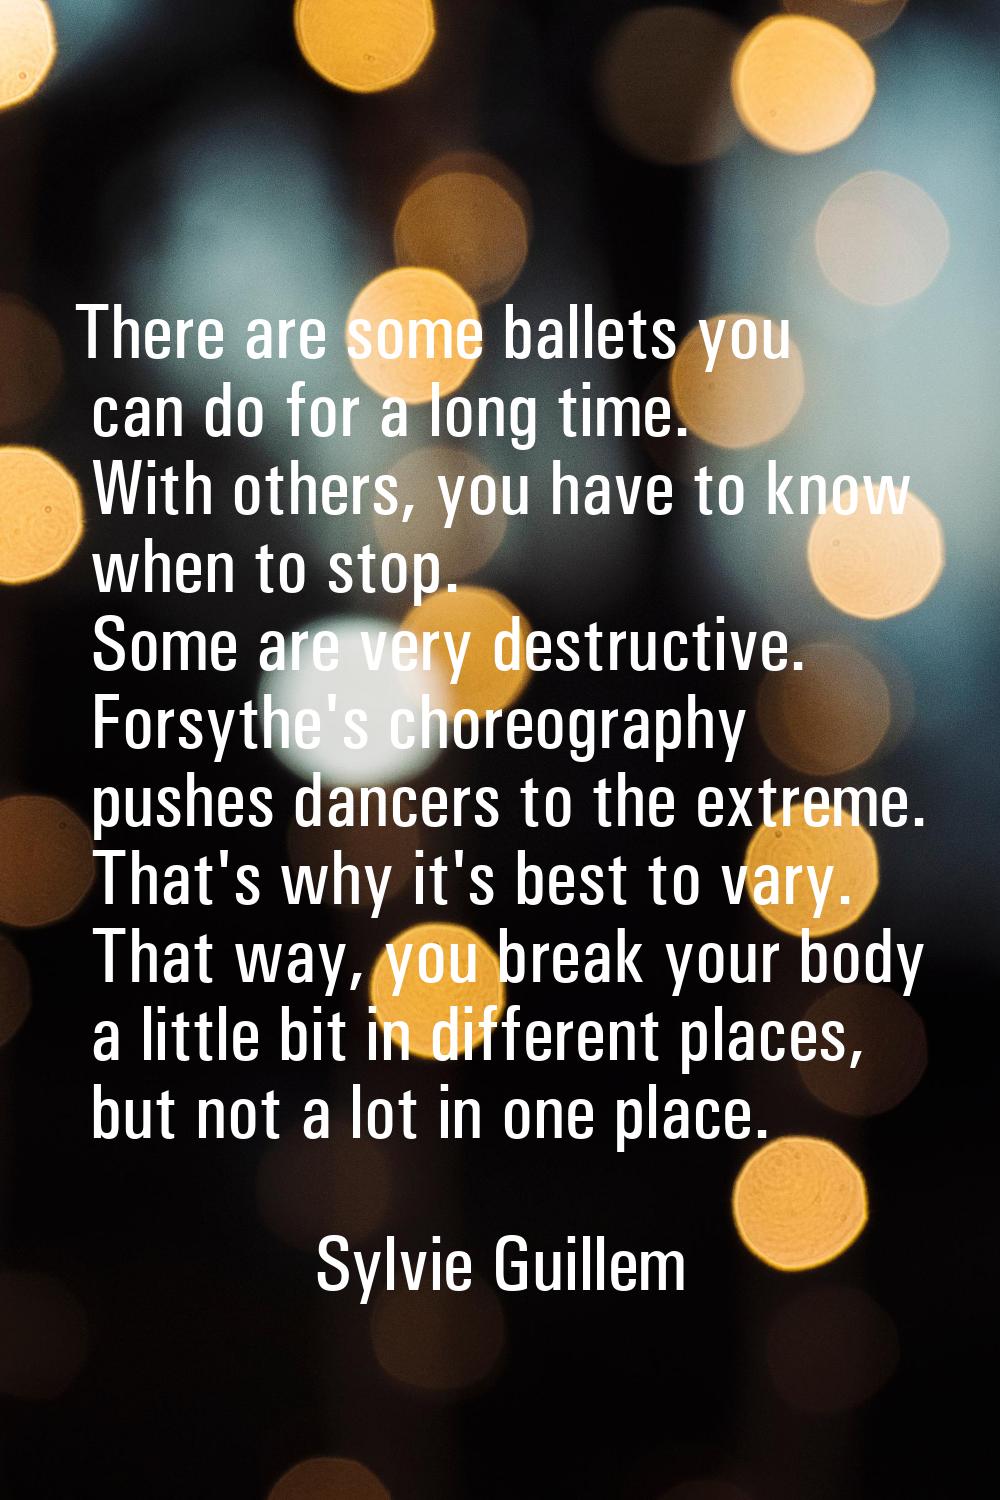 There are some ballets you can do for a long time. With others, you have to know when to stop. Some